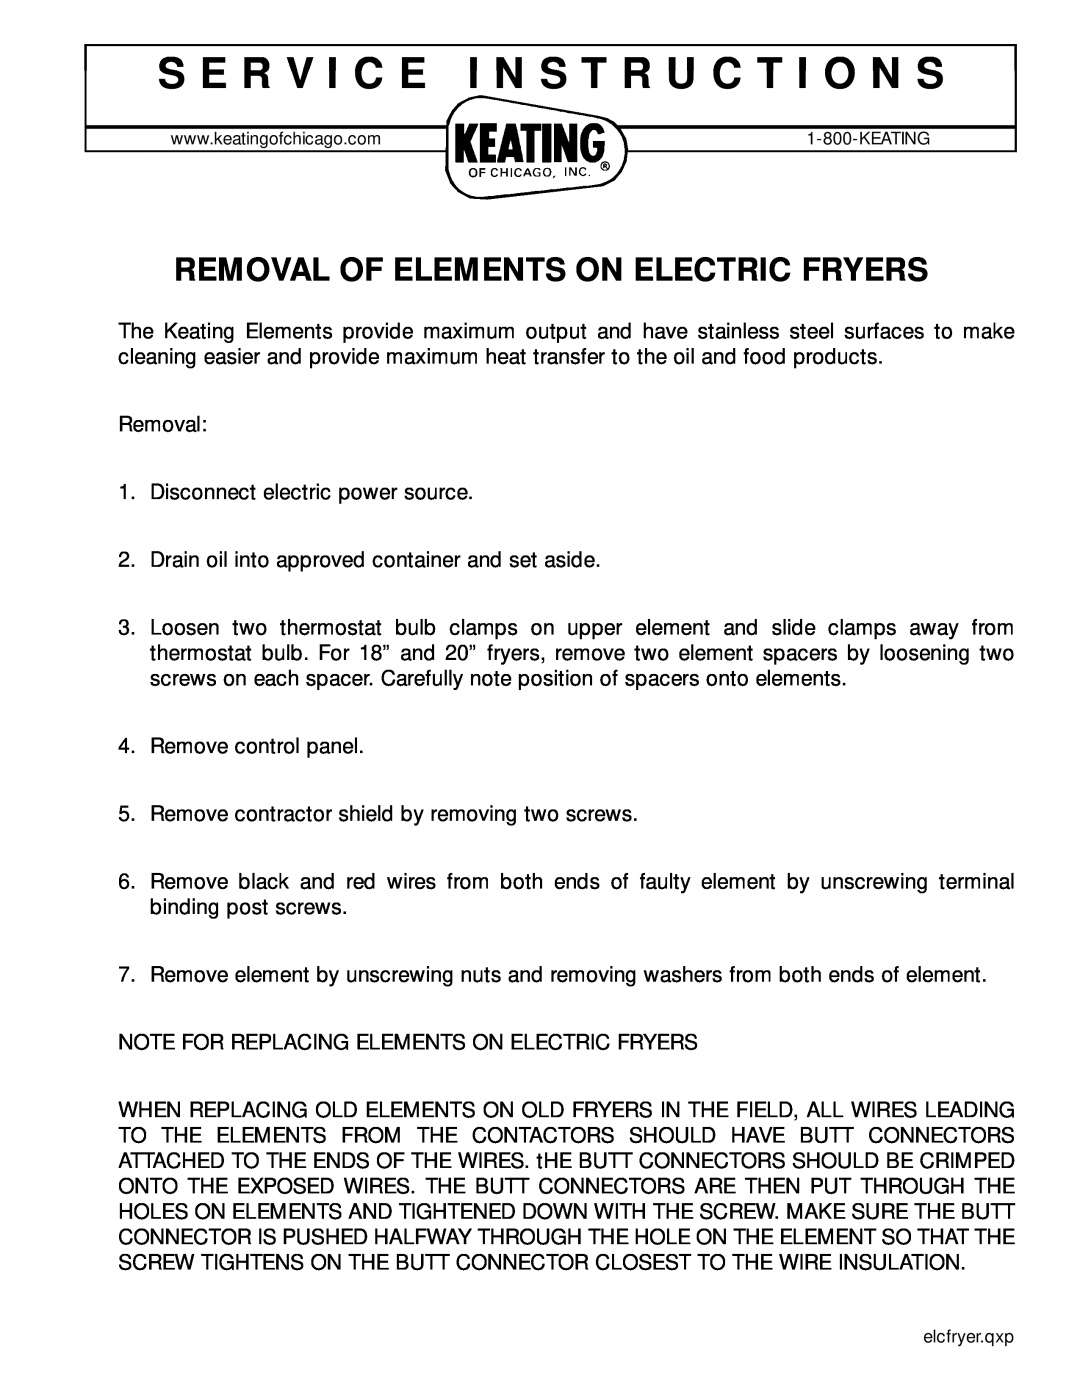 Keating Of Chicago manual S E R V I C E I N S T R U C T I O N S, Removal Of Elements On Electric Fryers 